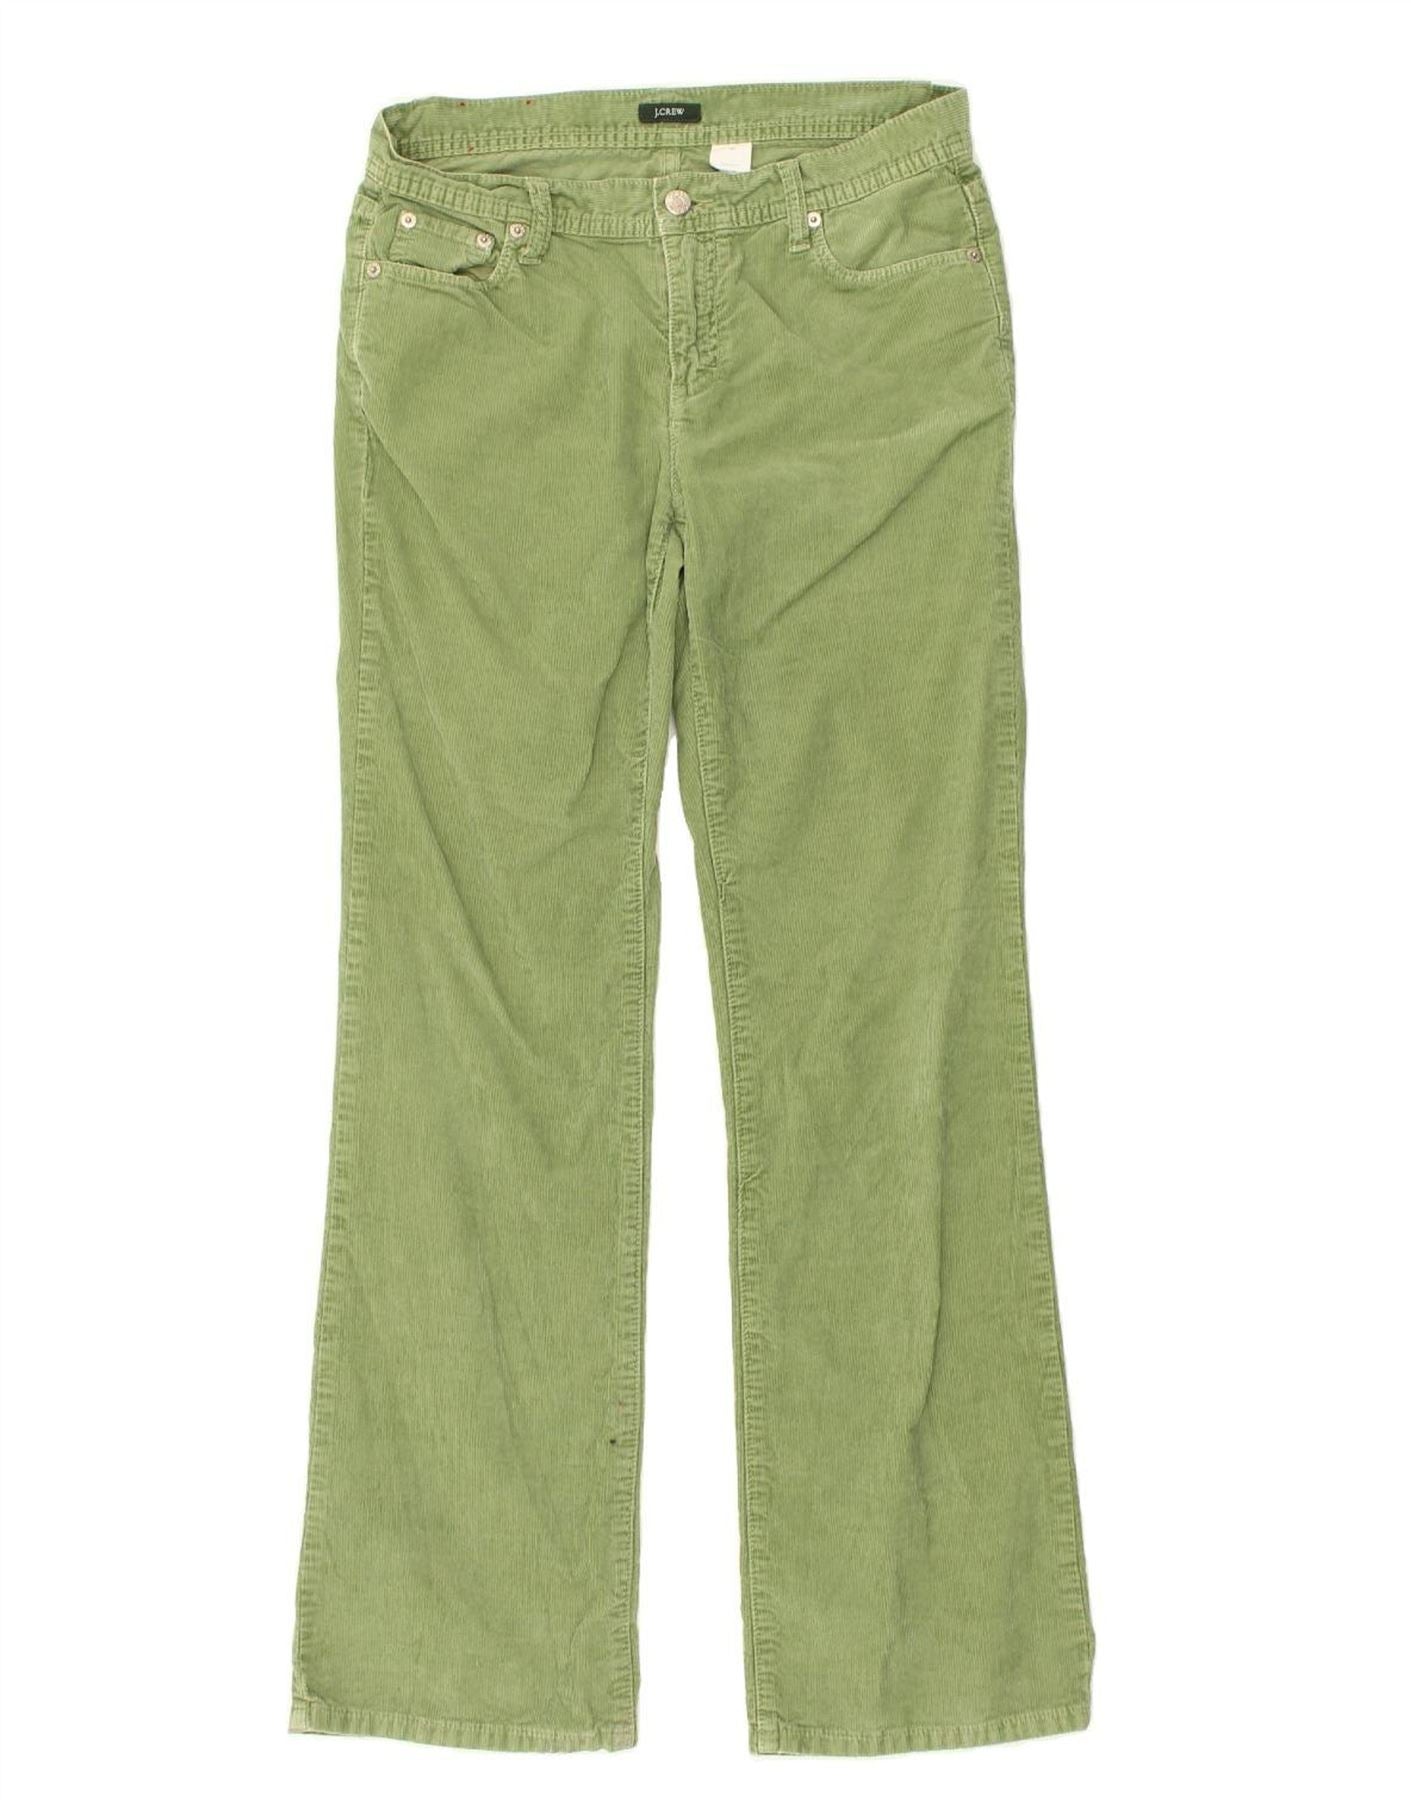 J. CREW Womens Bootcut Corduroy Trousers US 4 Small W30 L30 Green Cotton, Vintage & Second-Hand Clothing Online